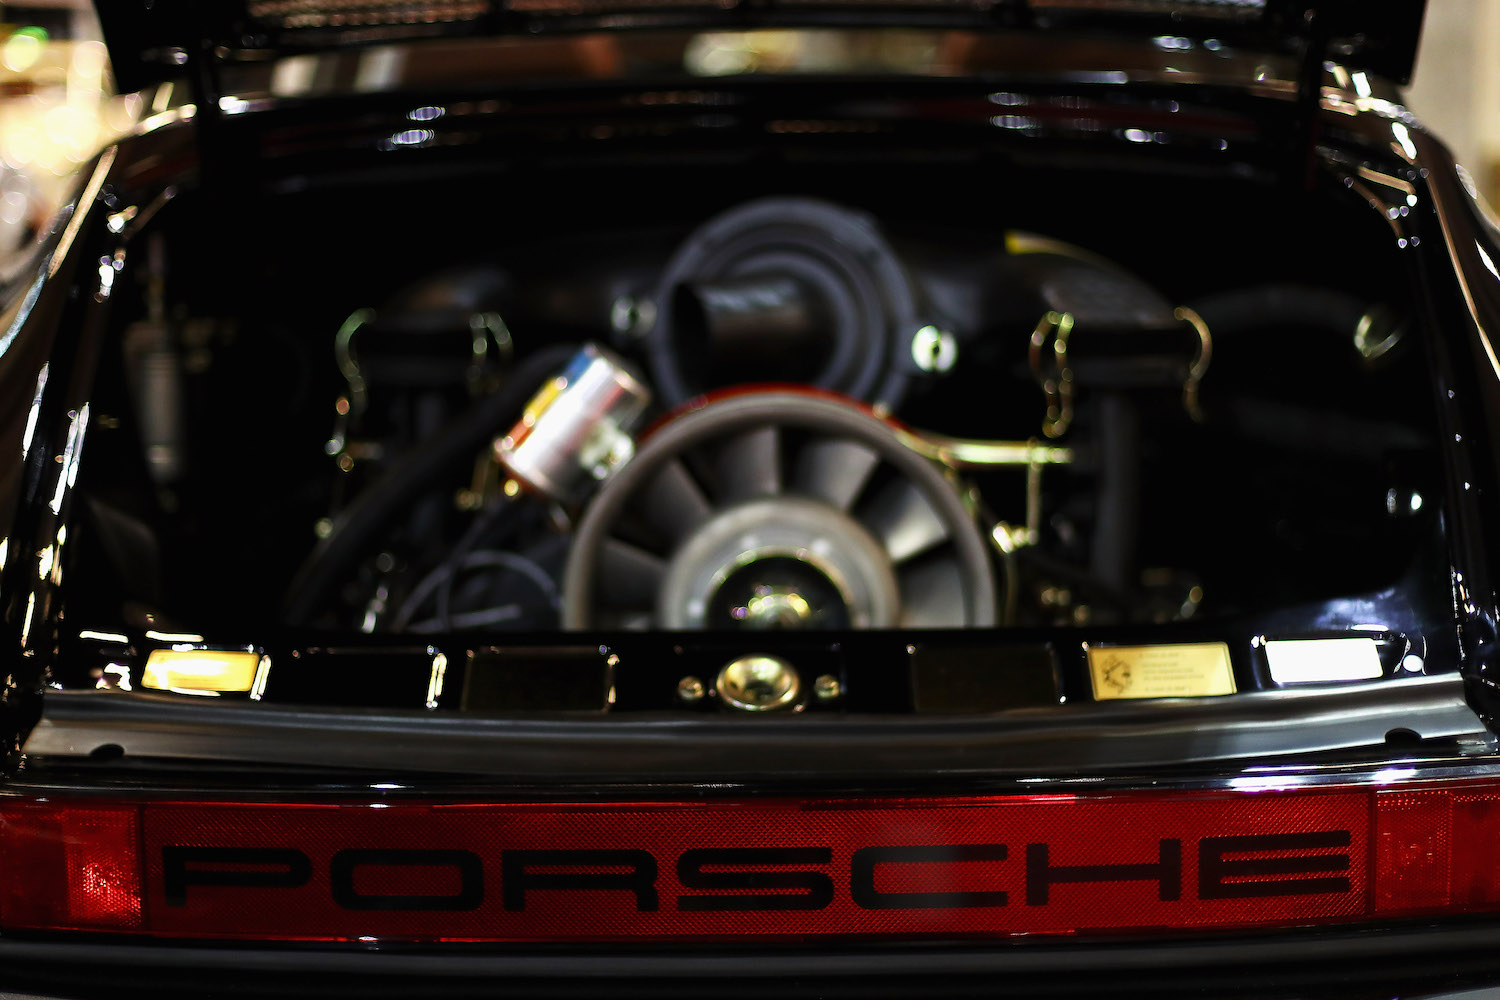 Closeup of the engine bay of a black Porsche 911 with its air cooled flat-six engine.